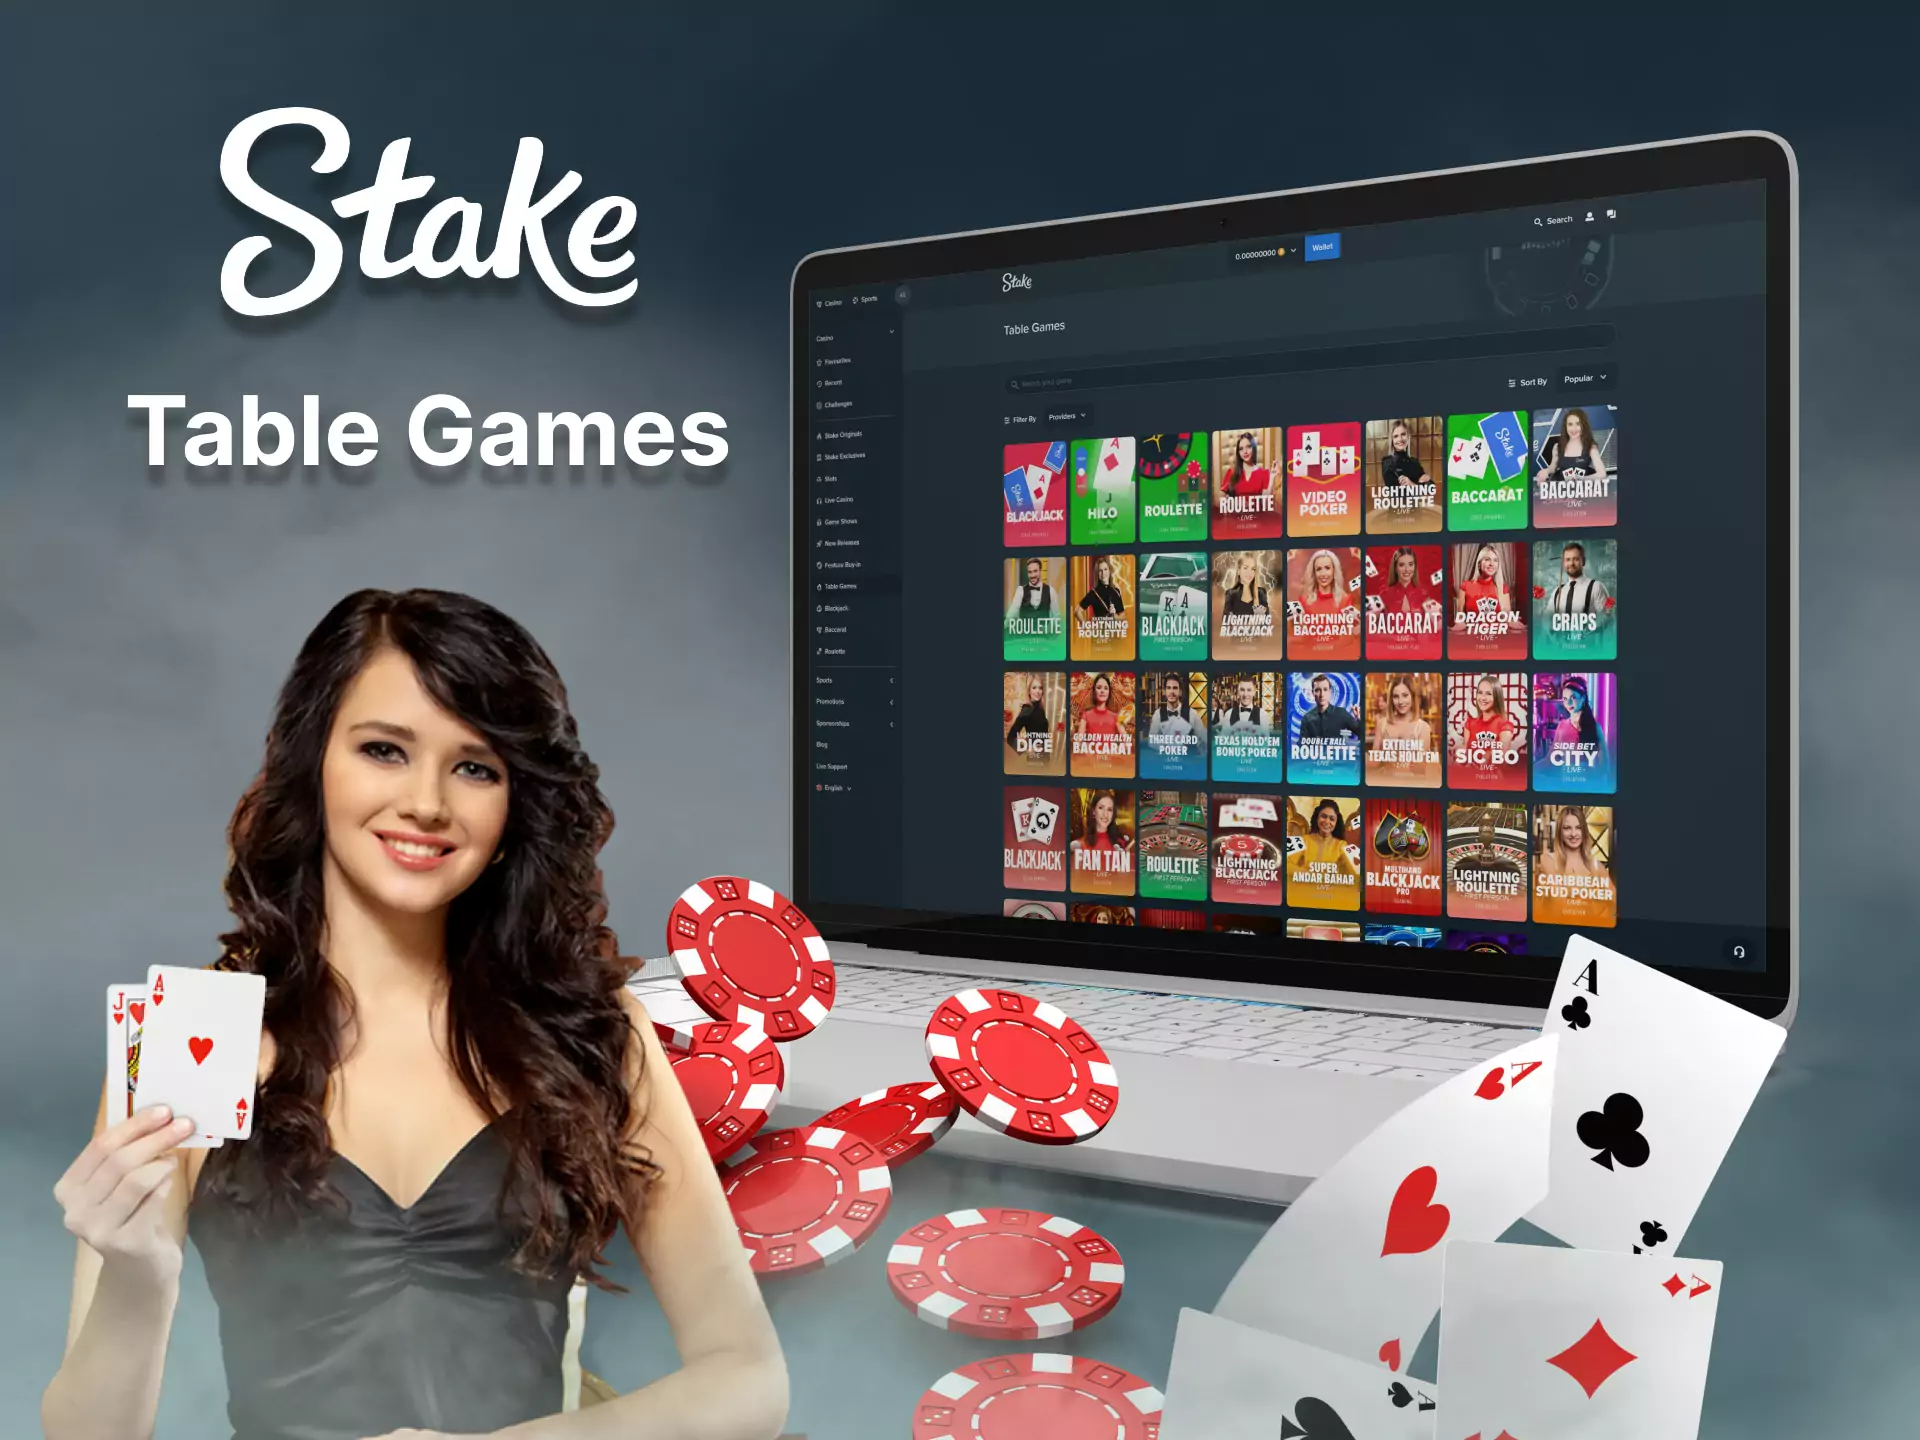 Table games are widely presented in the Stake Casino.